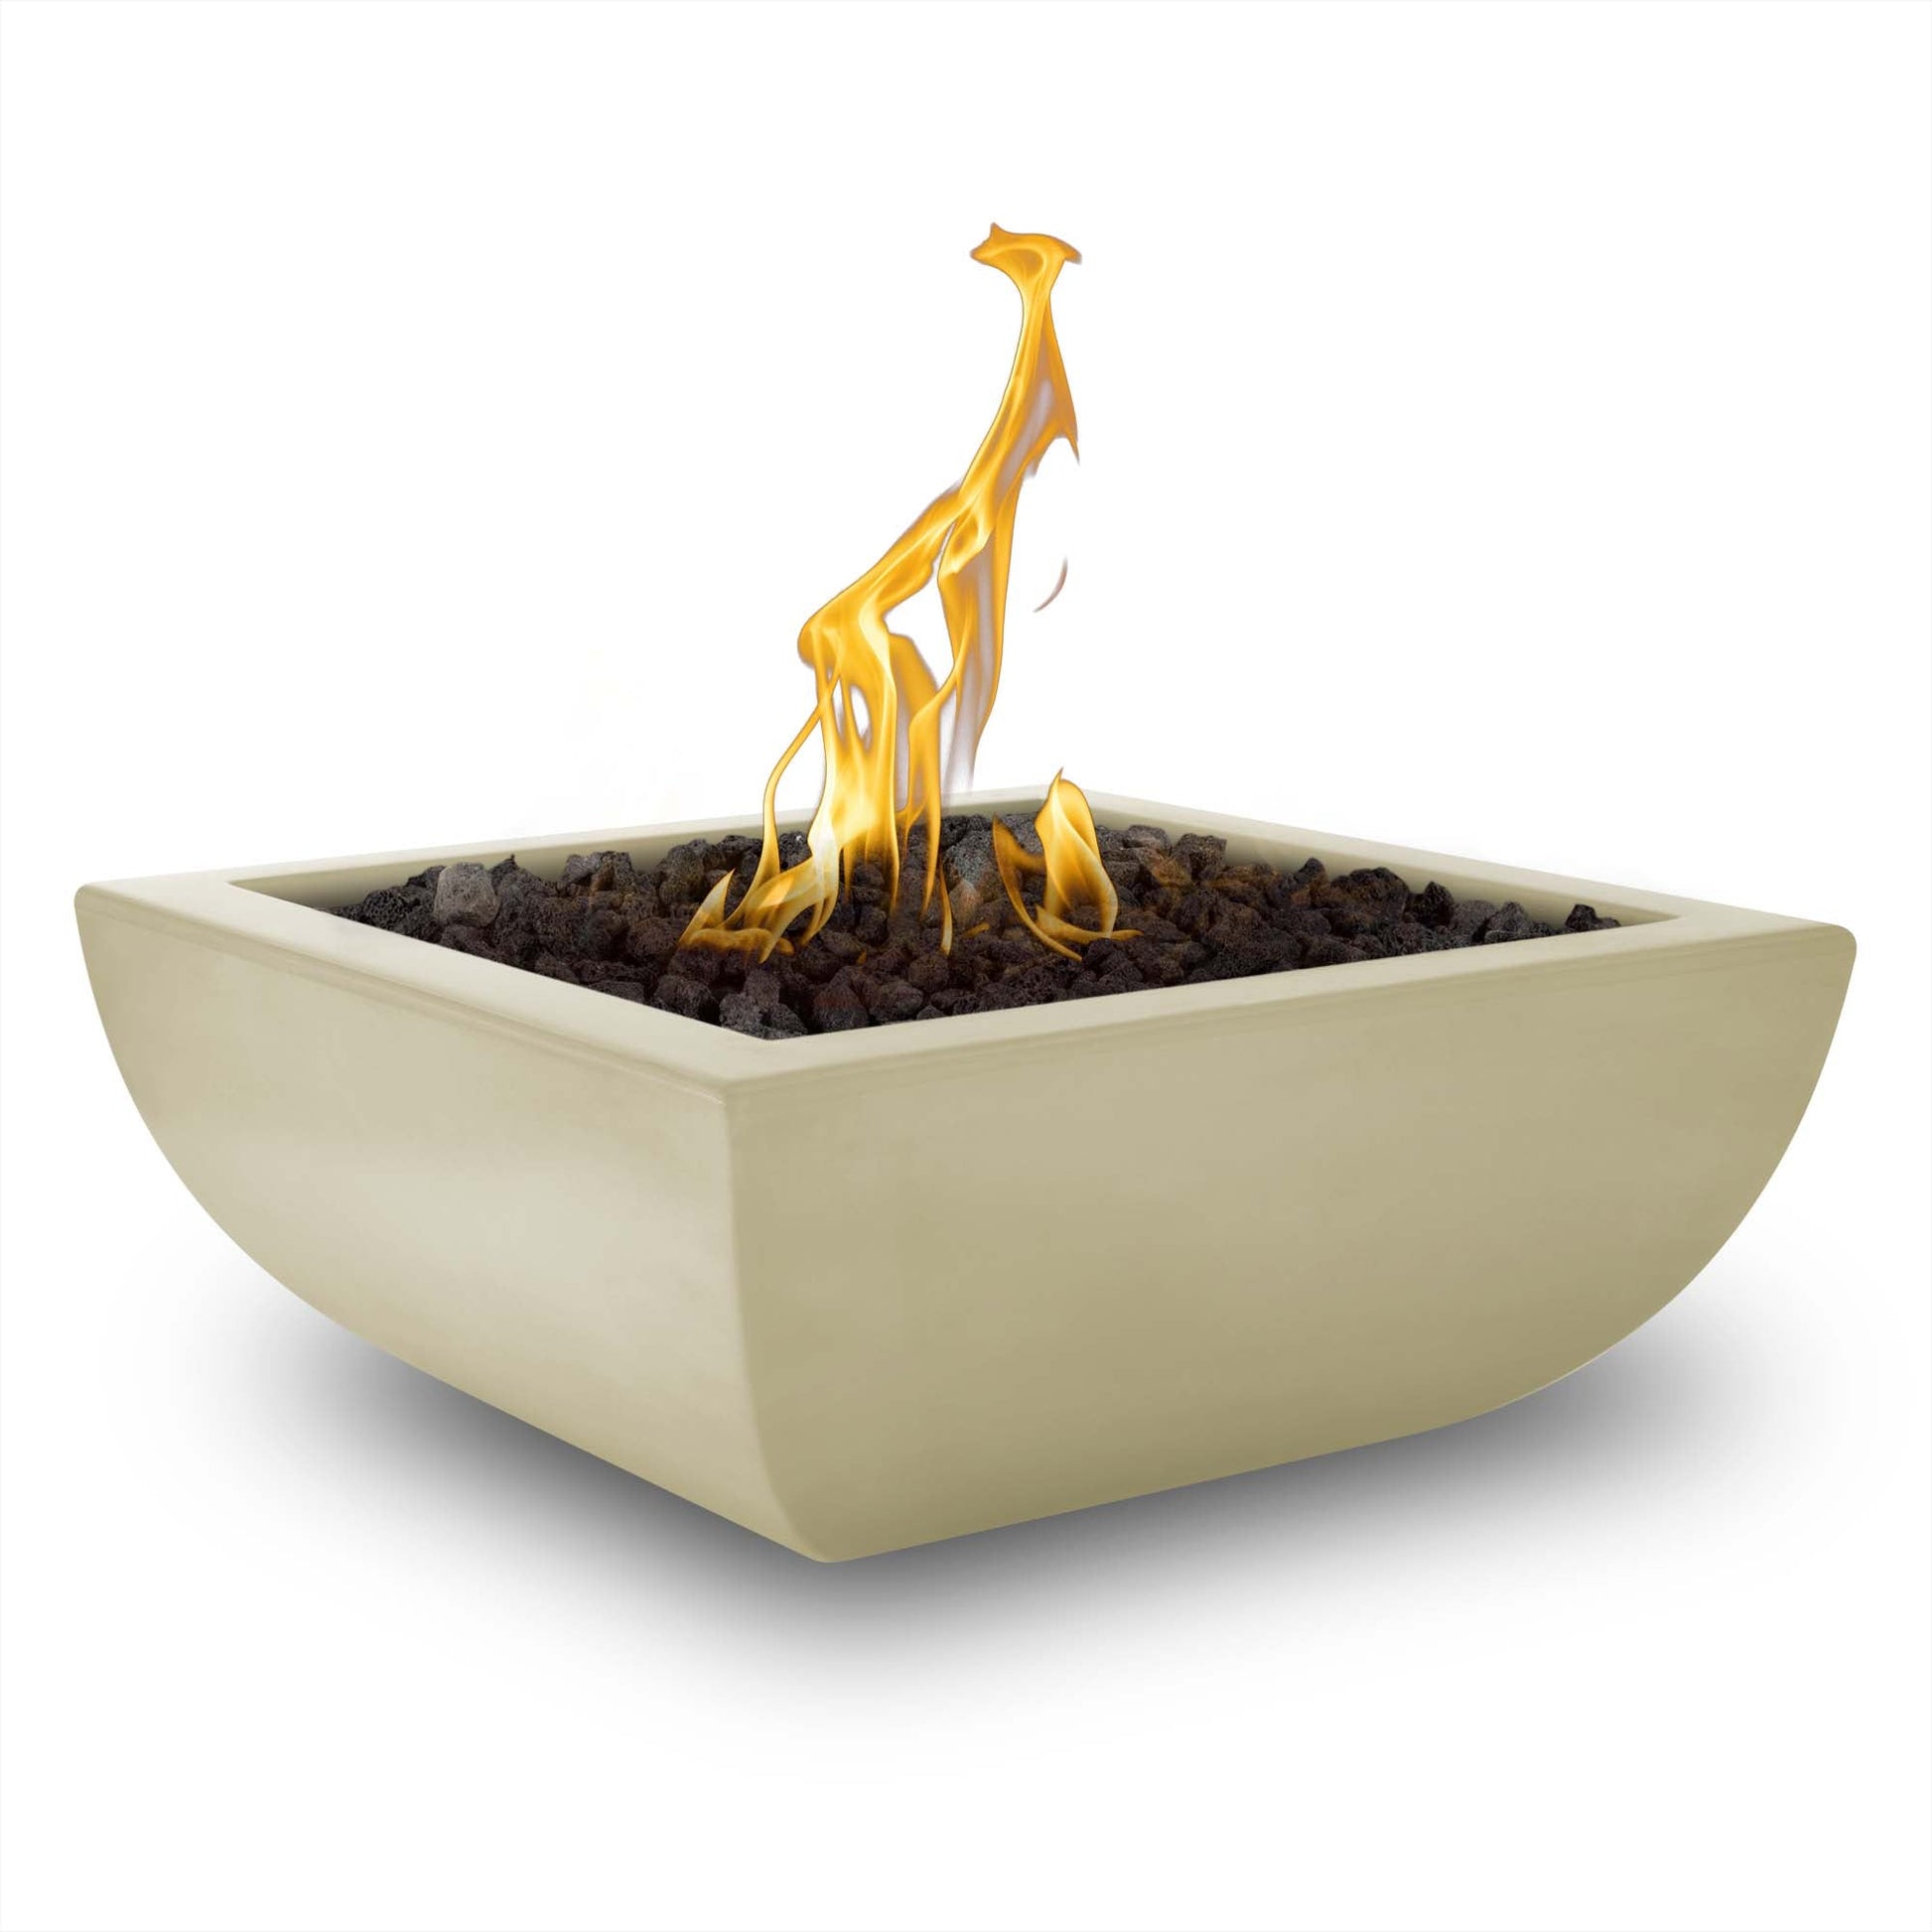 The Outdoor Plus Square Avalon 30" Metallic Pearl GFRC Concrete Natural Gas Fire Bowl with Match Lit with Flame Sense Ignition